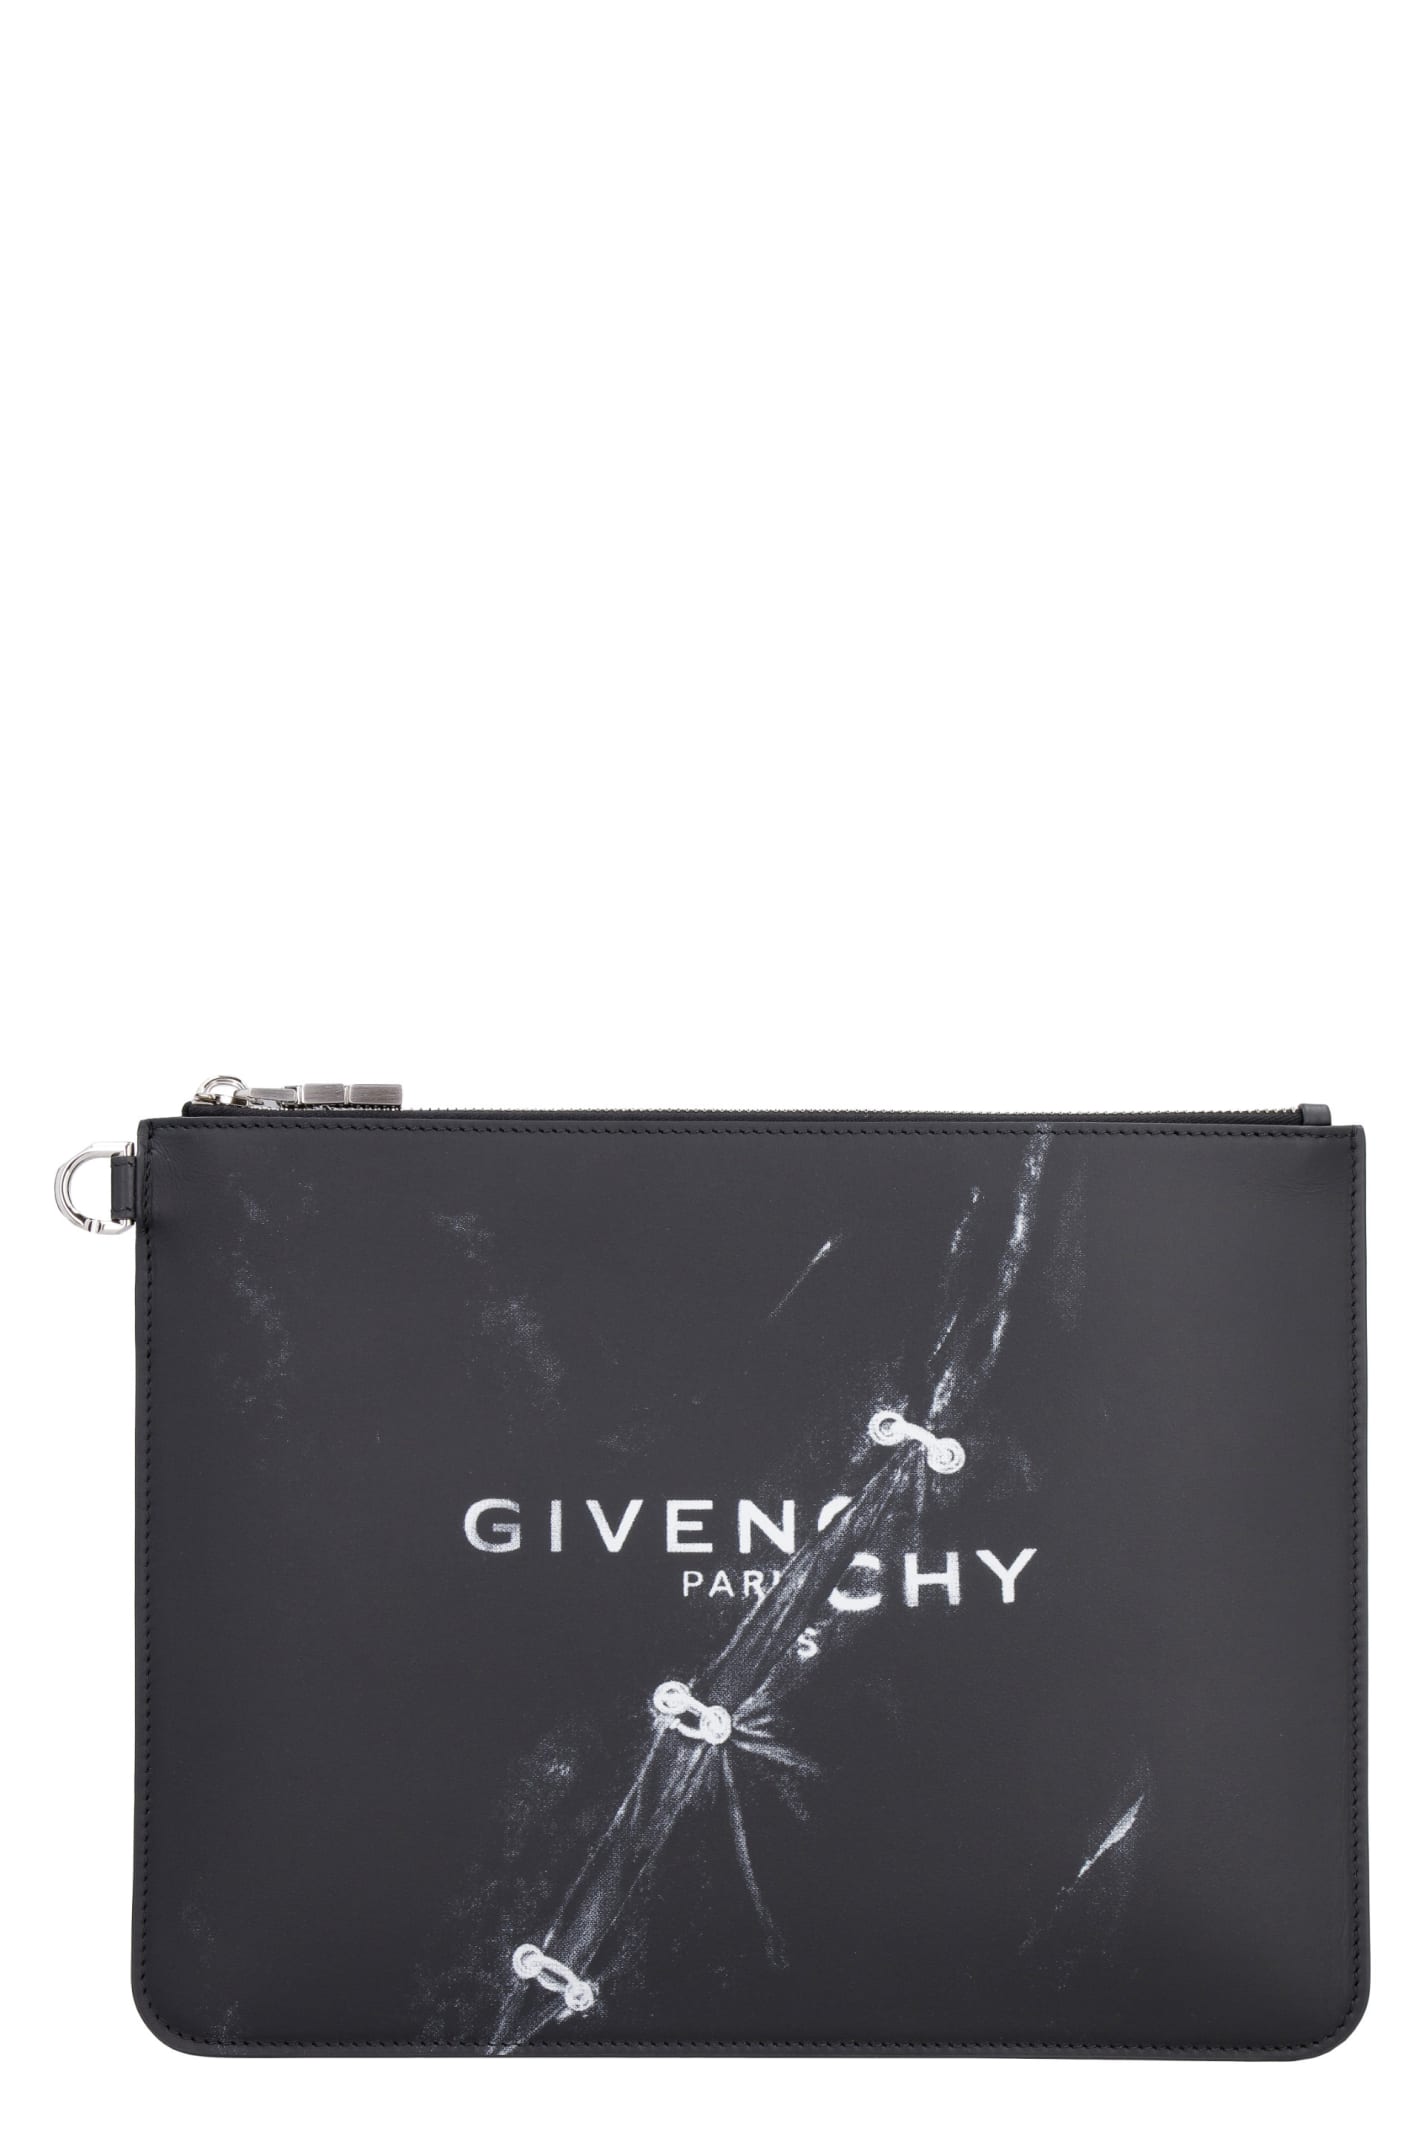 Givenchy Printed Leather Flat Pouch